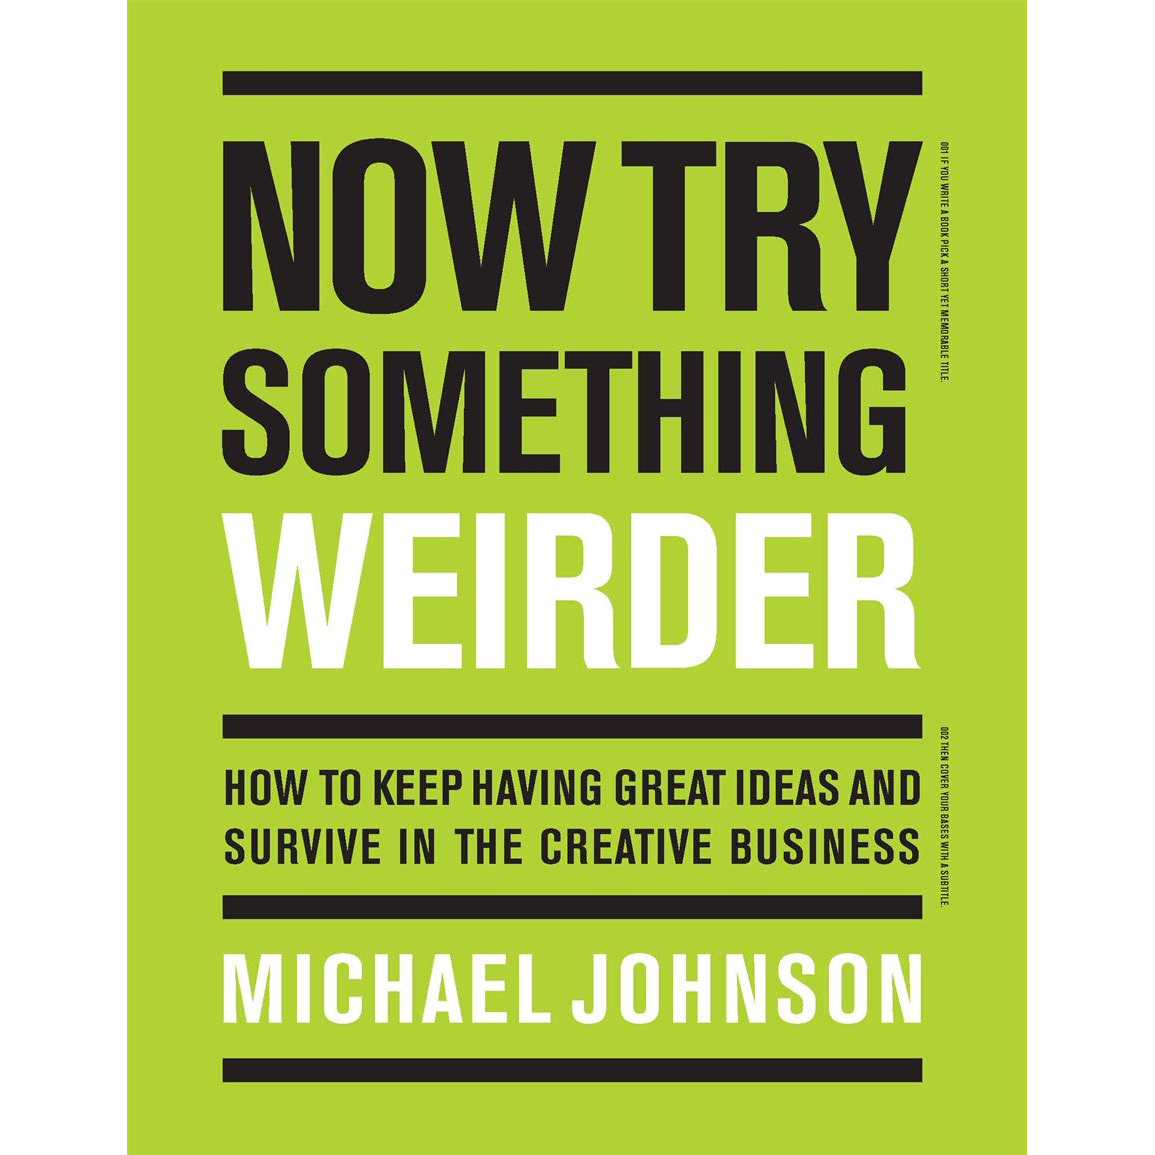 Now Try Something Weirder: How to keep having great ideas and survive in the creative business